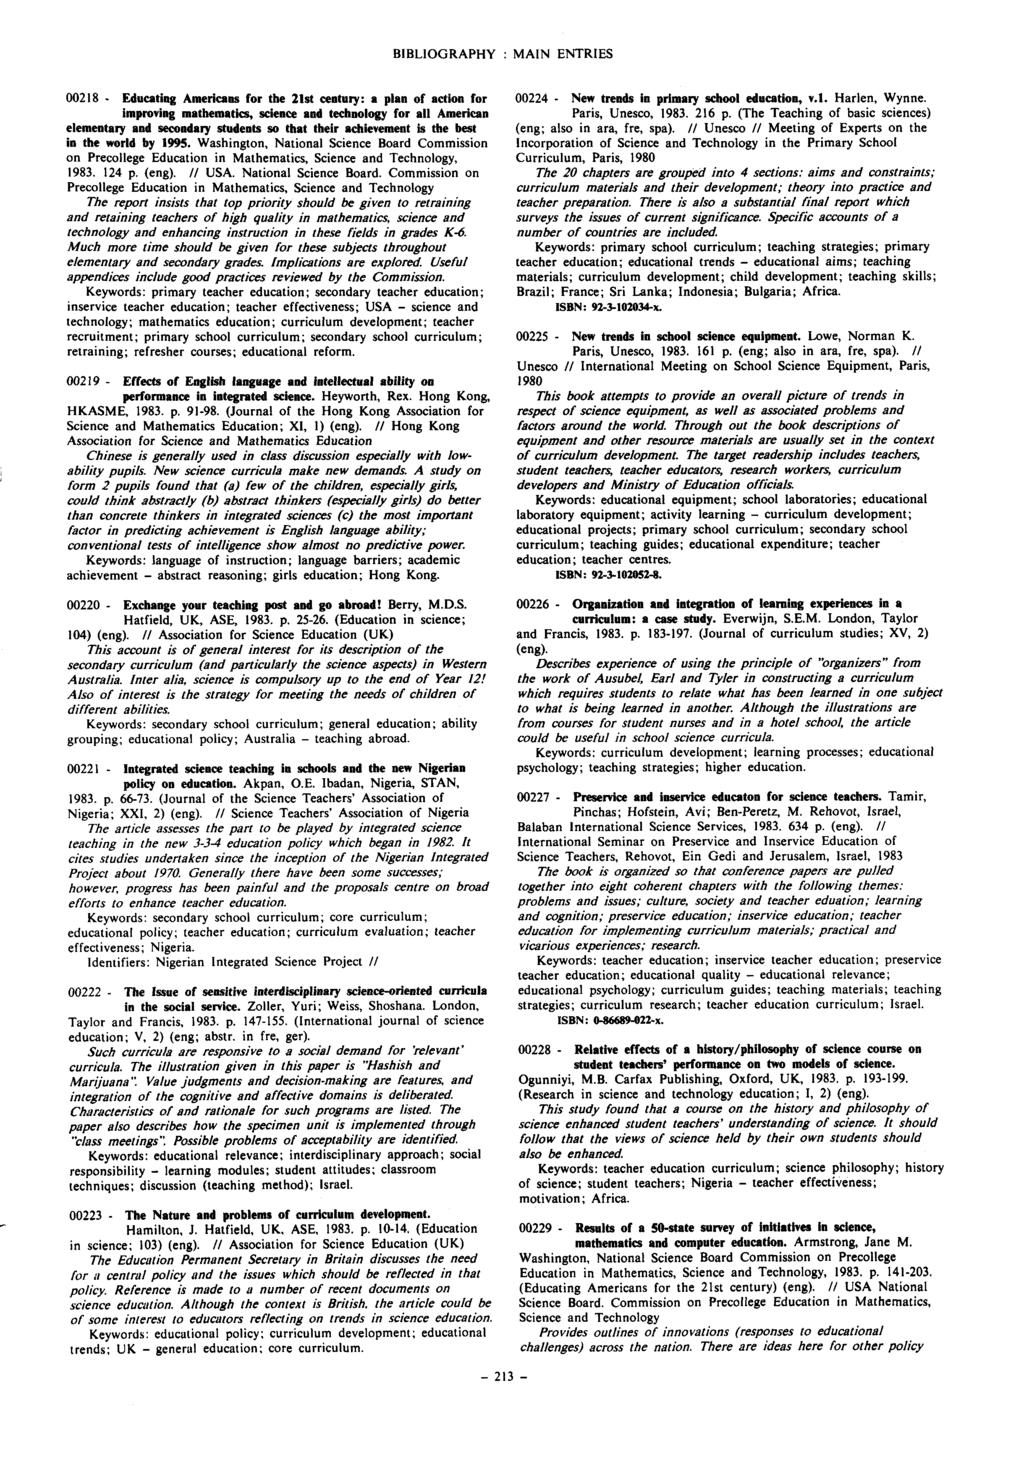 BIBLIOGRAPHY : MAIN ENTRIES - 00218 - Educating Americans for the 2lst century: a plan of action for improving mathematics, science and technology for all American elementary and secondary students